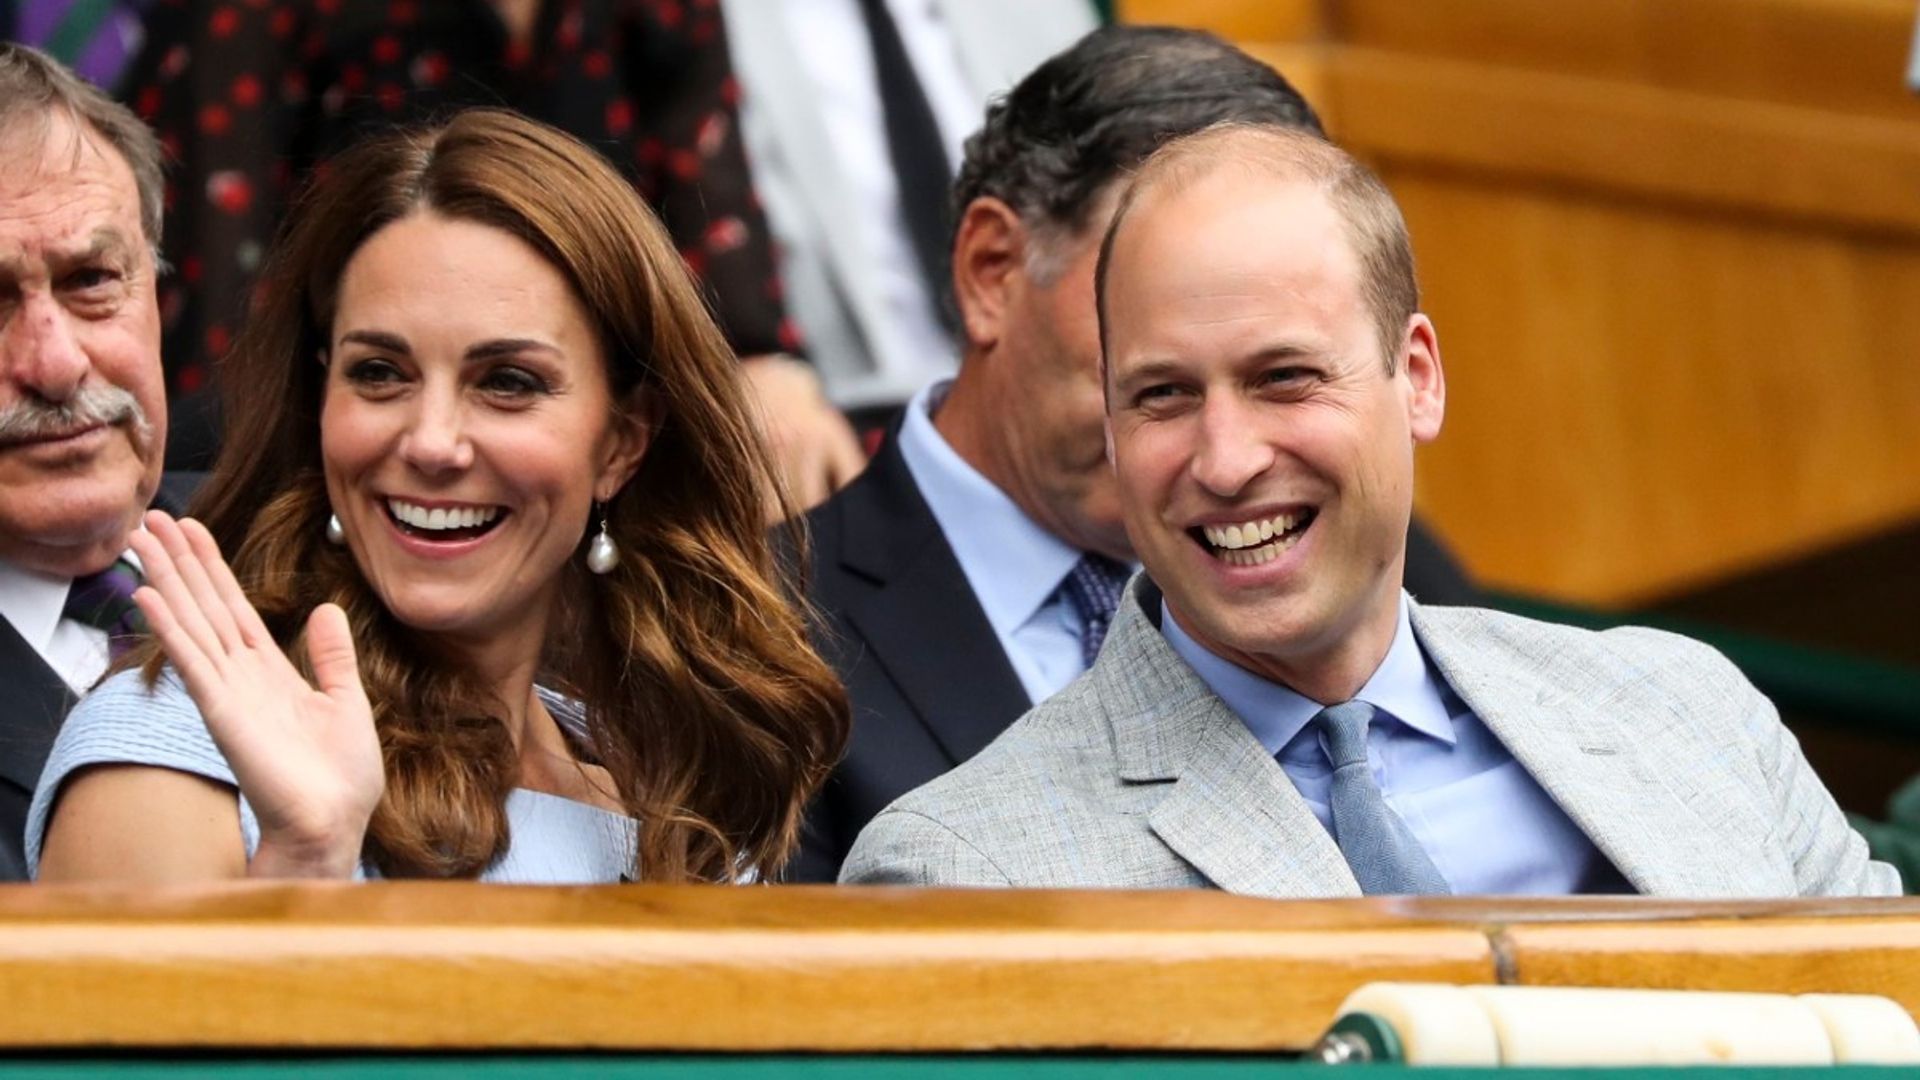 Kate Middleton and Prince William join the Middleton family at Wimbledon men's final